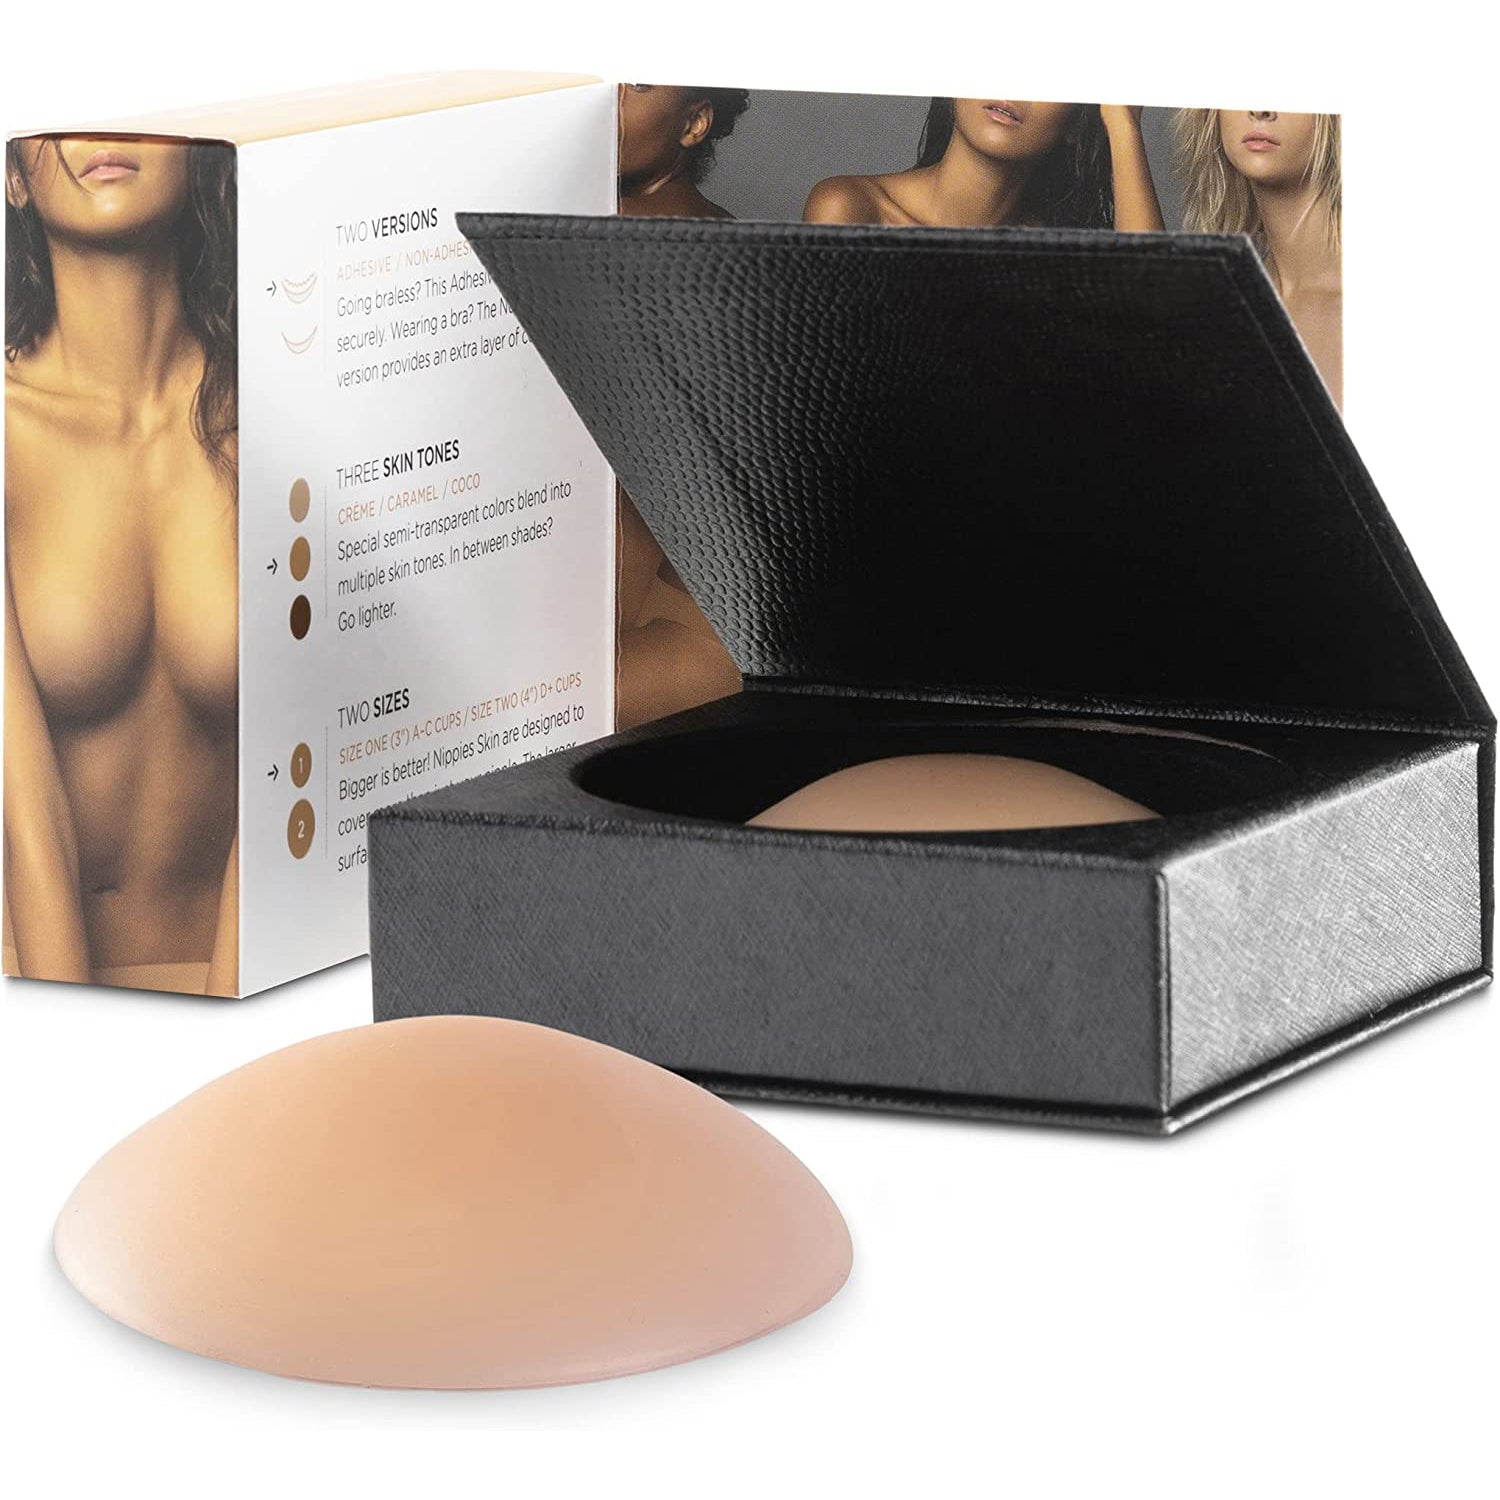 Nipple Cover-Sticky Adhesive Silicone Nipple Pasties - Reusable for Women  with Travel Box